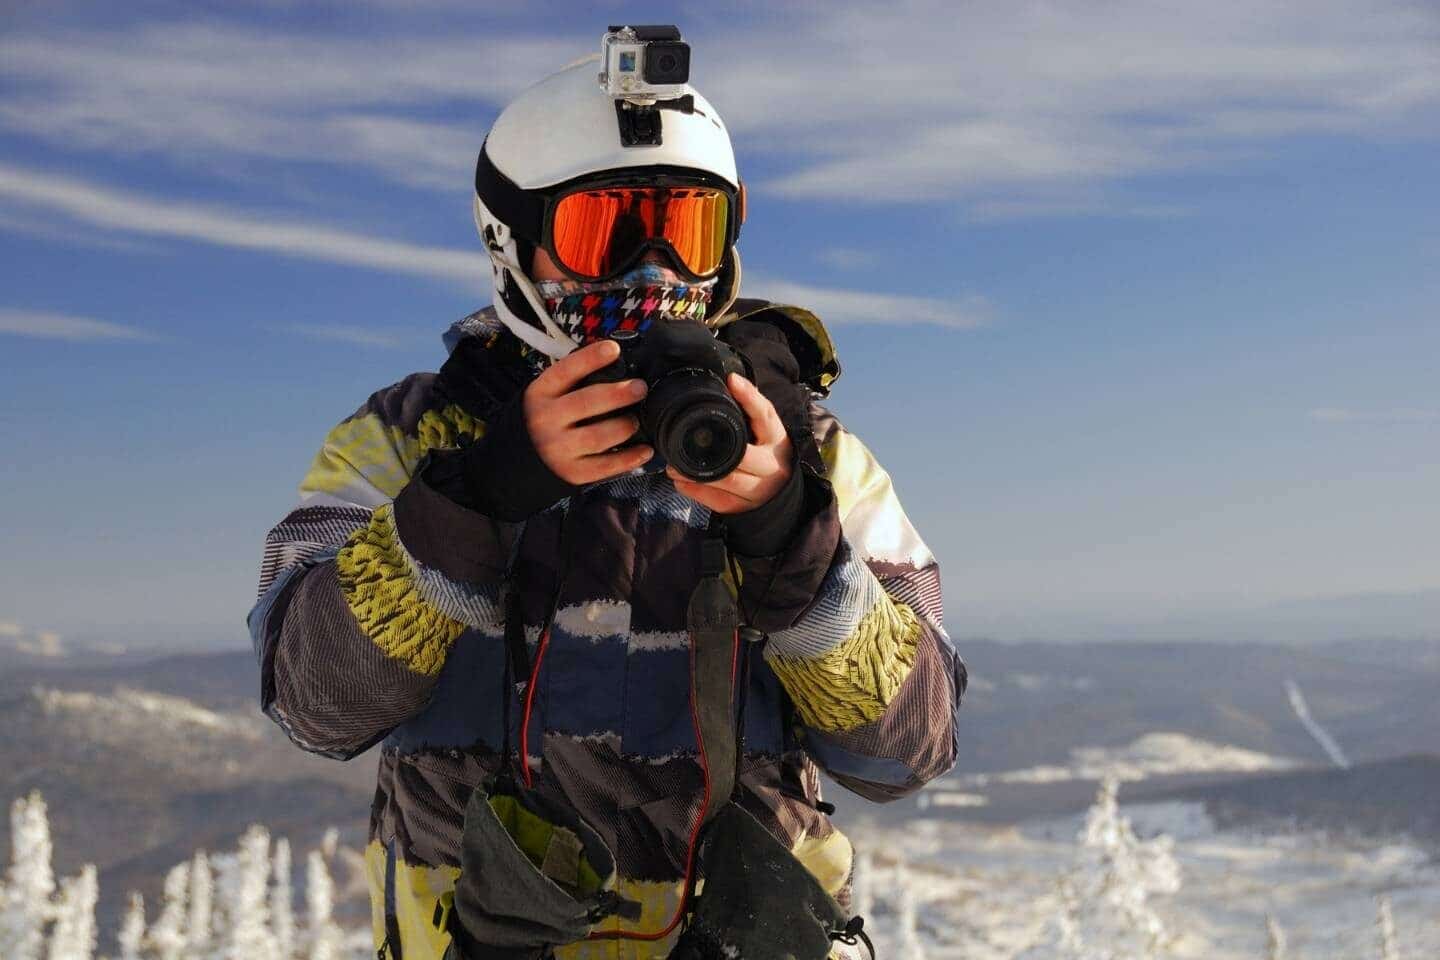 Skier with Camera